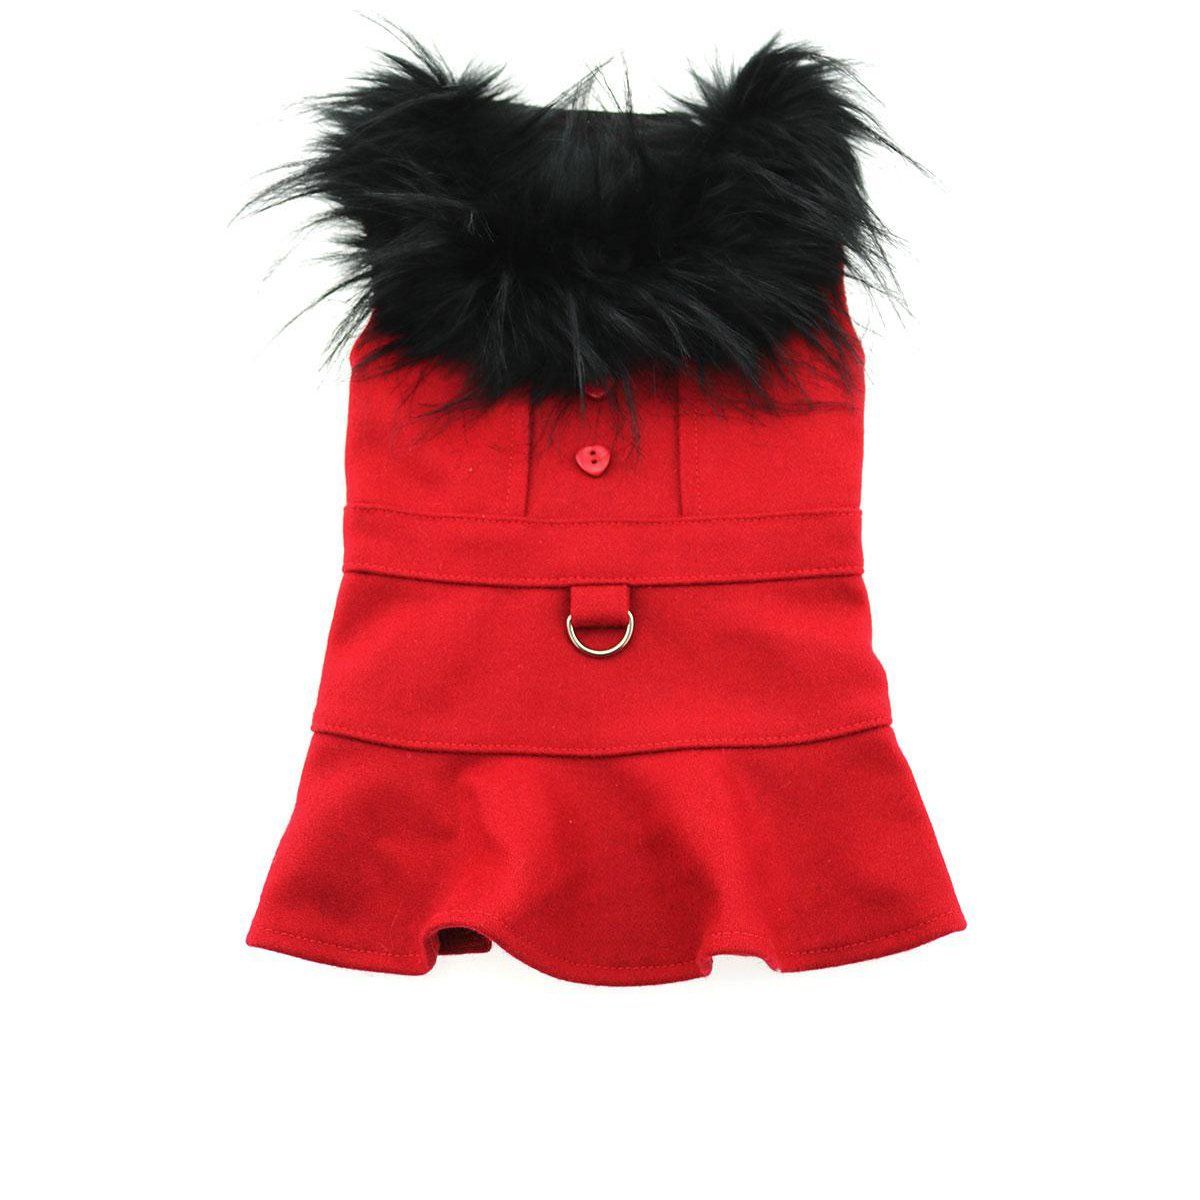 Wool Dog Coat Fur Trimmed in Red | Pawlicious & Company